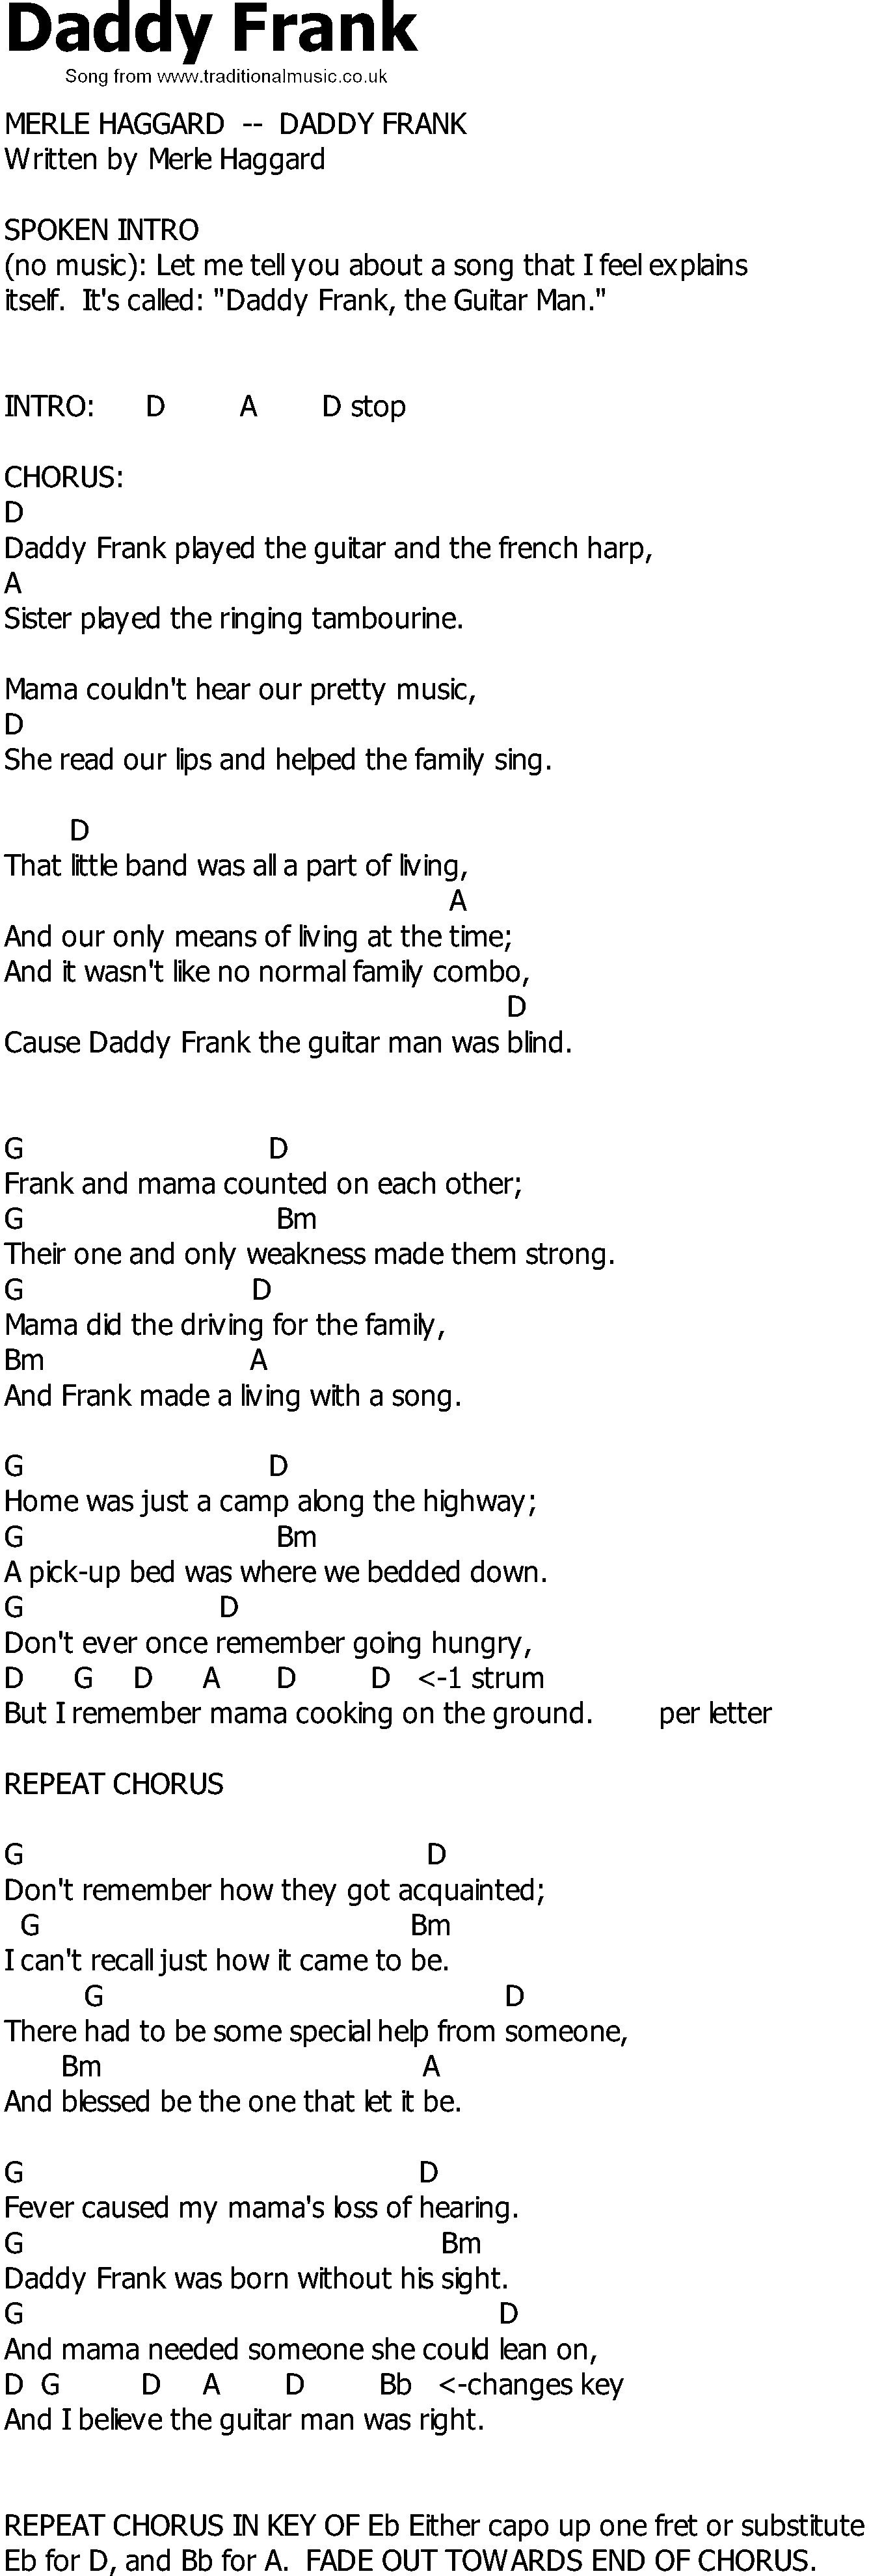 Old Country song lyrics with chords - Daddy Frank